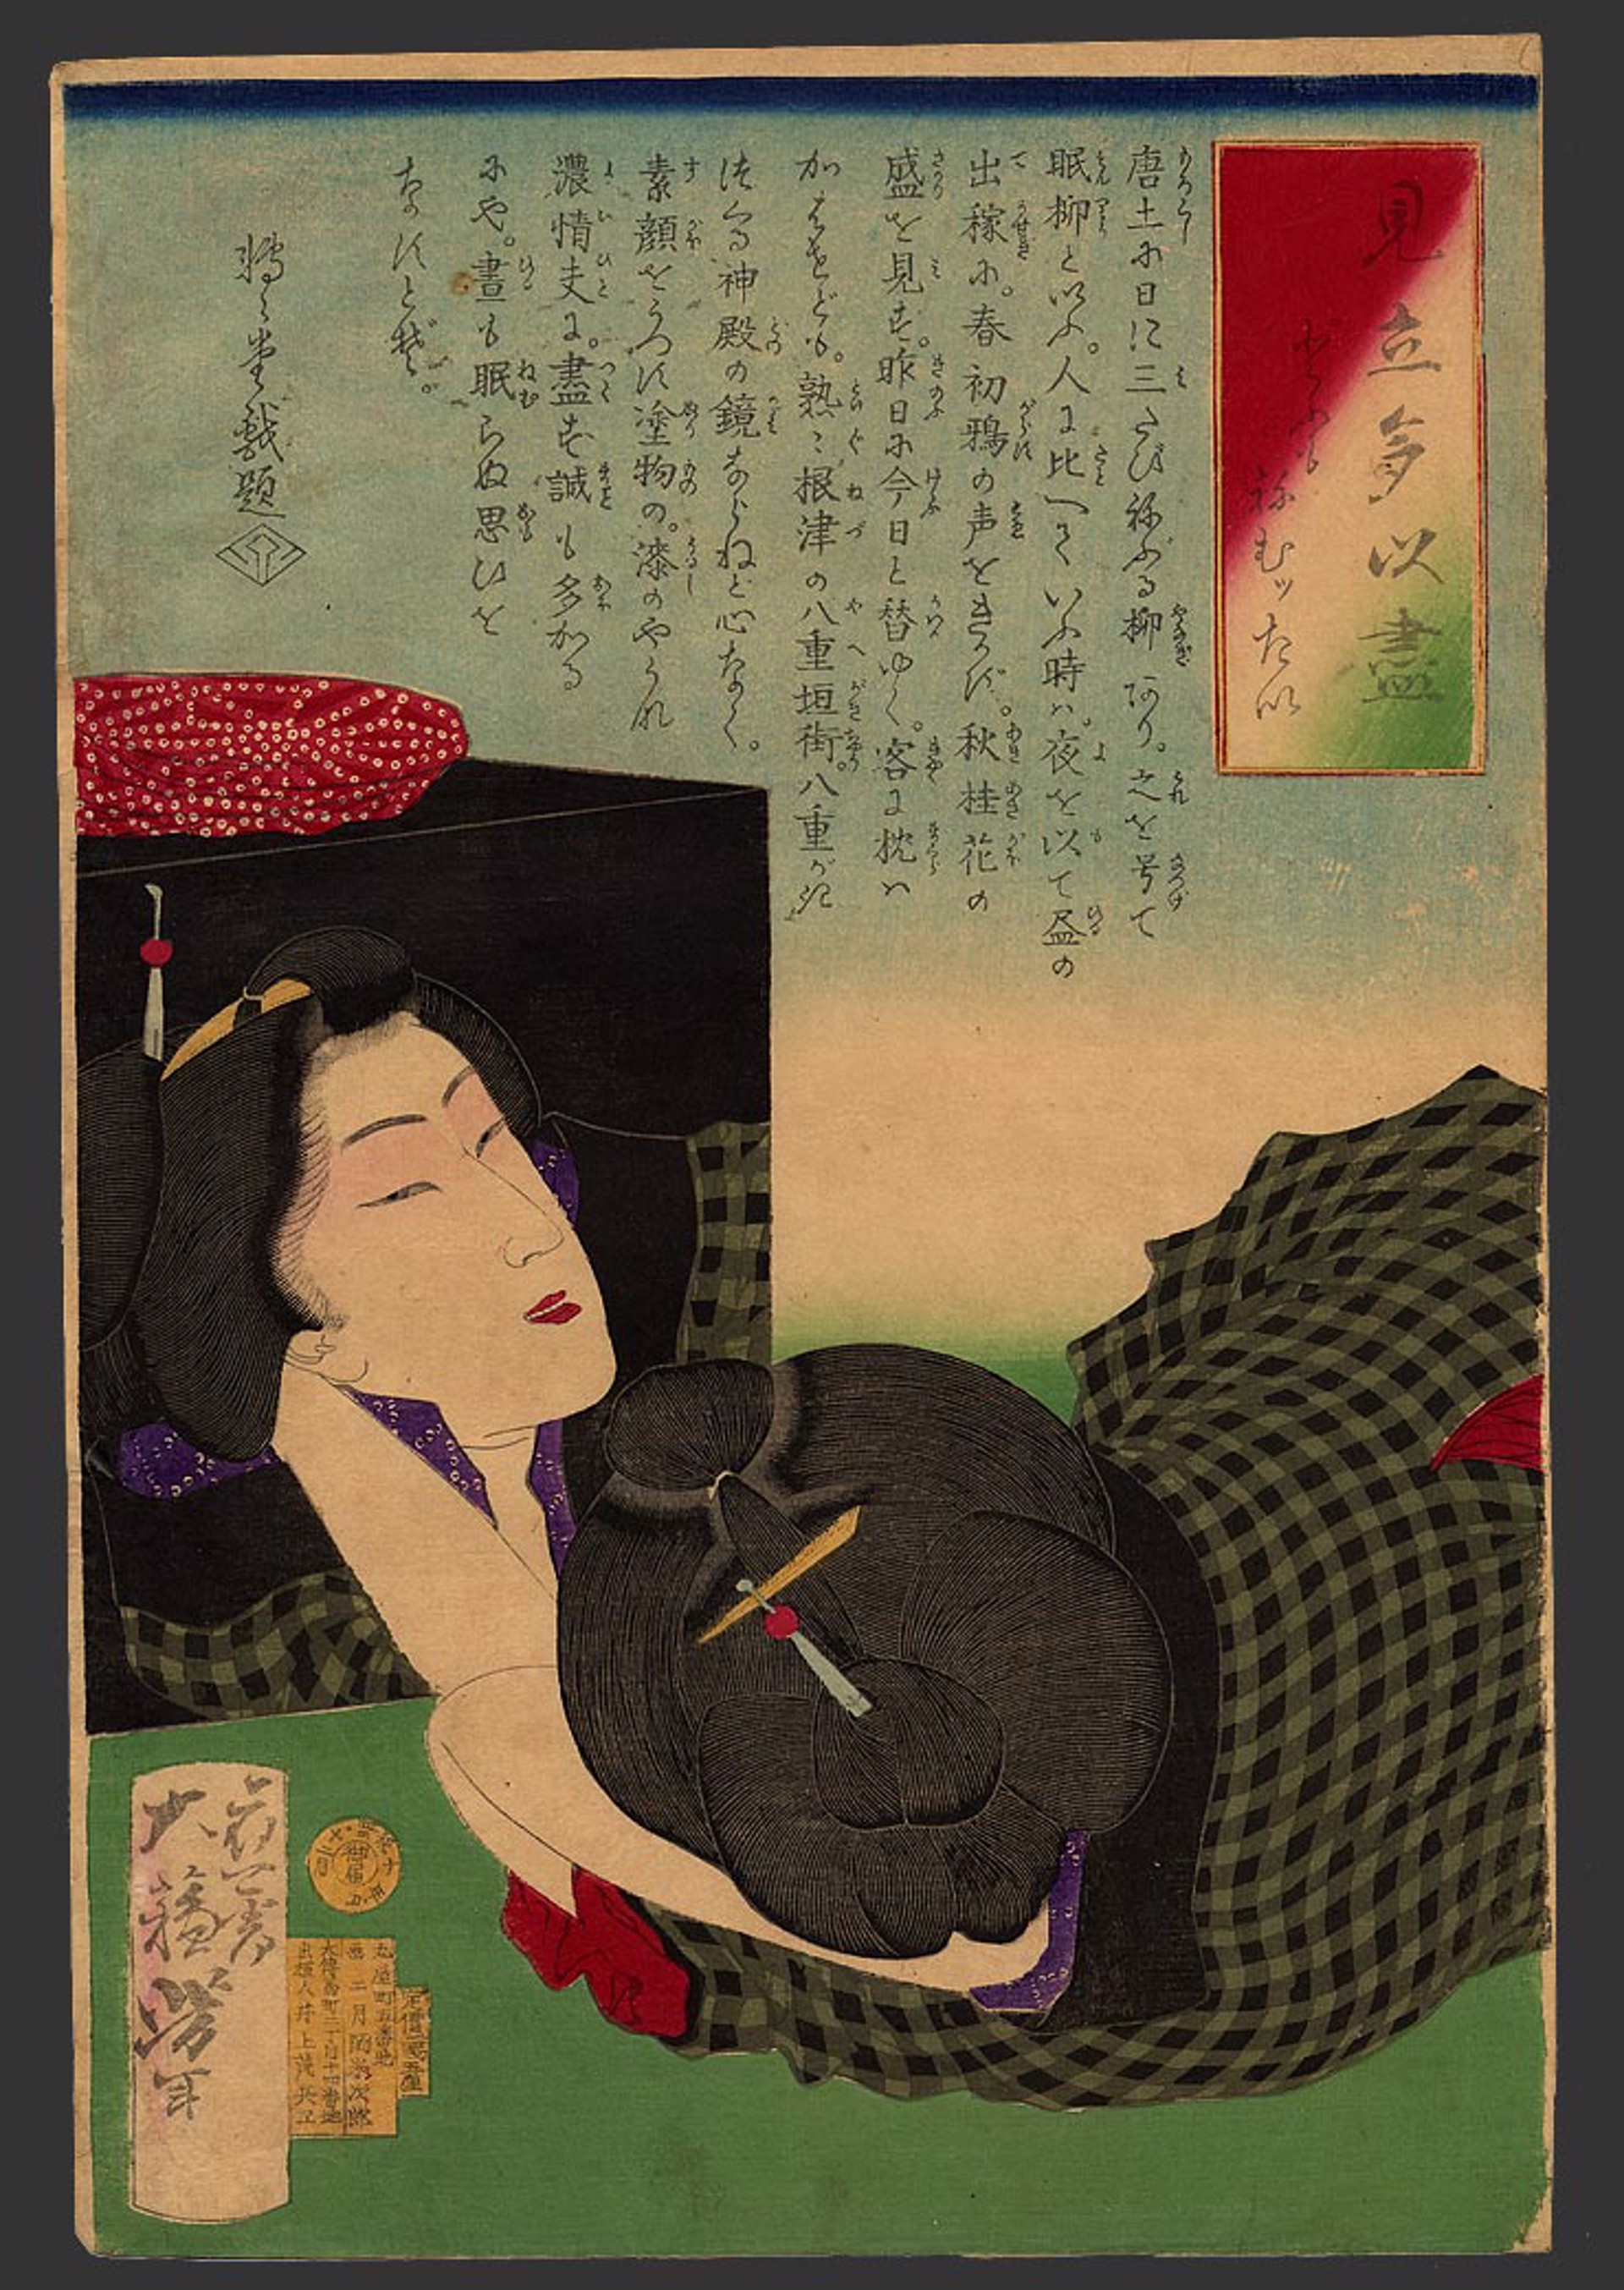 I want to sleep, oh so badly A collection of desires by Yoshitoshi